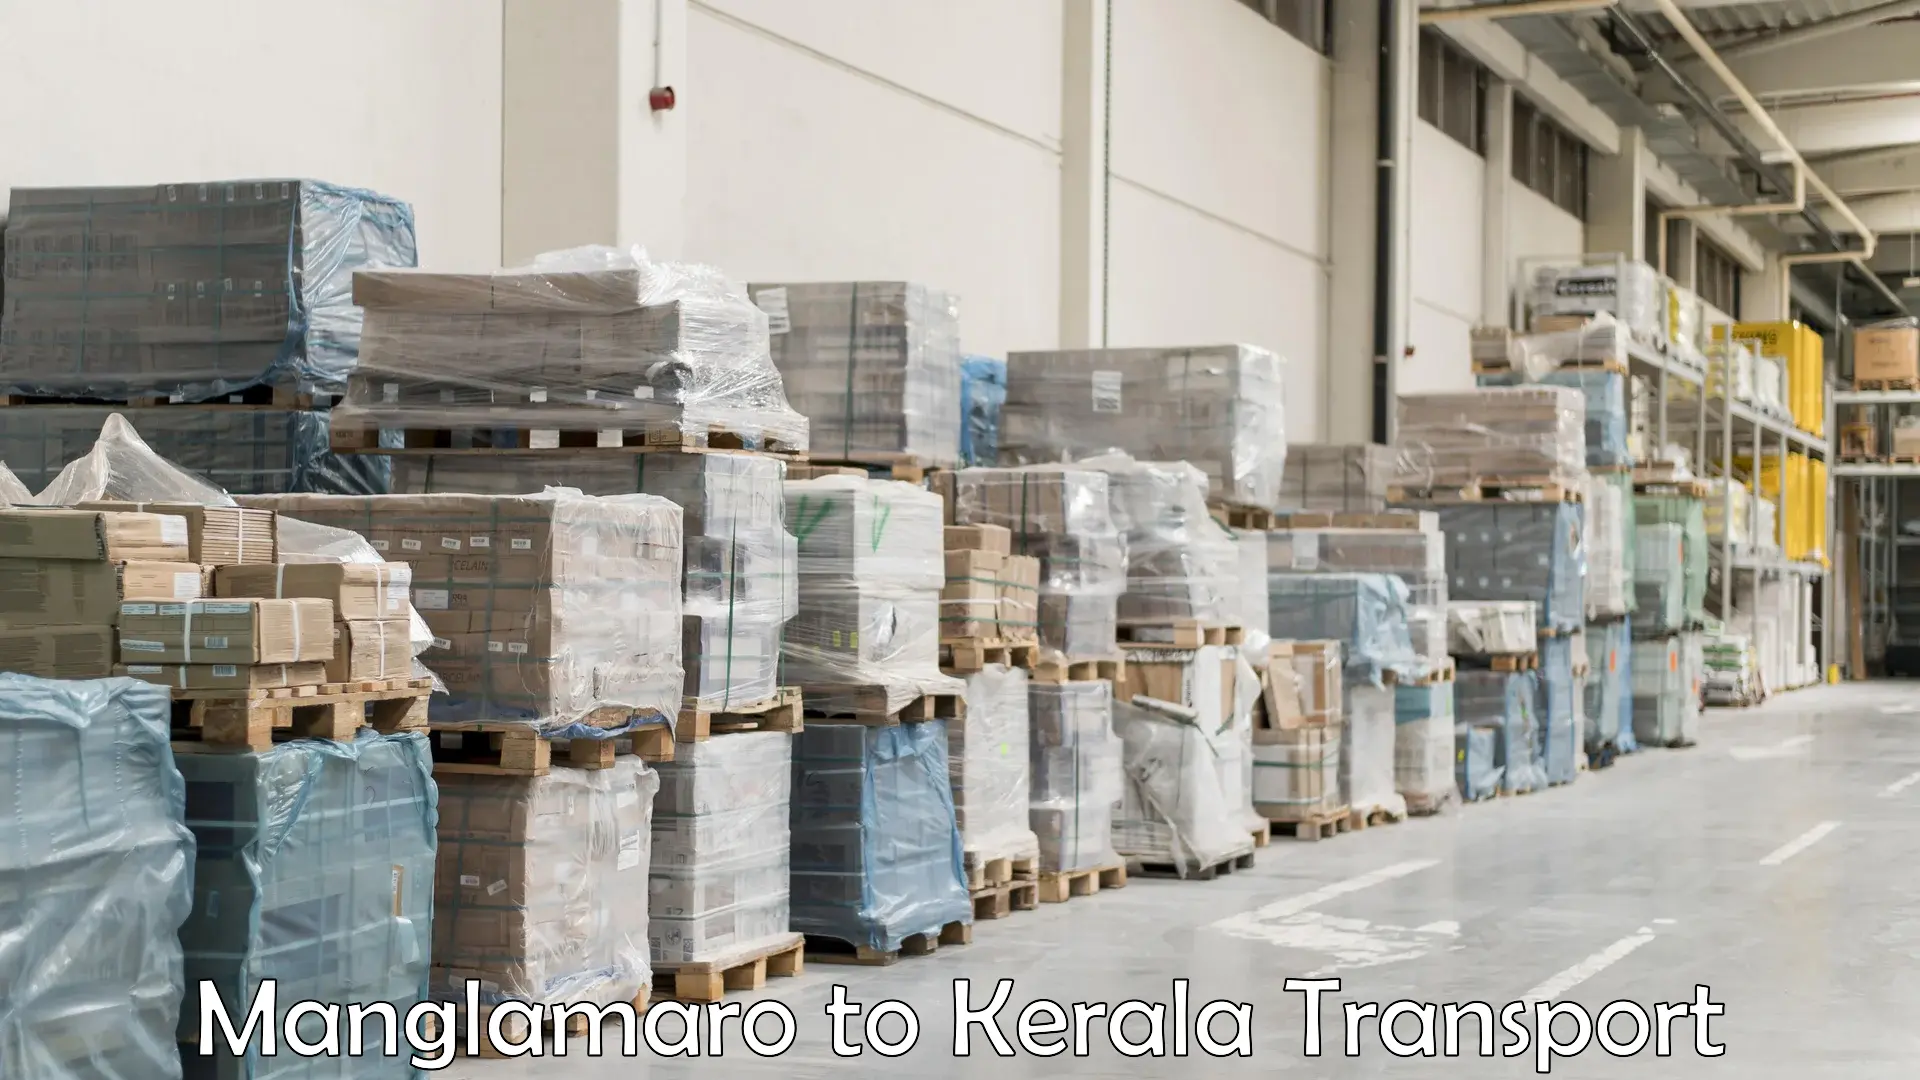 Truck transport companies in India Manglamaro to Parappa